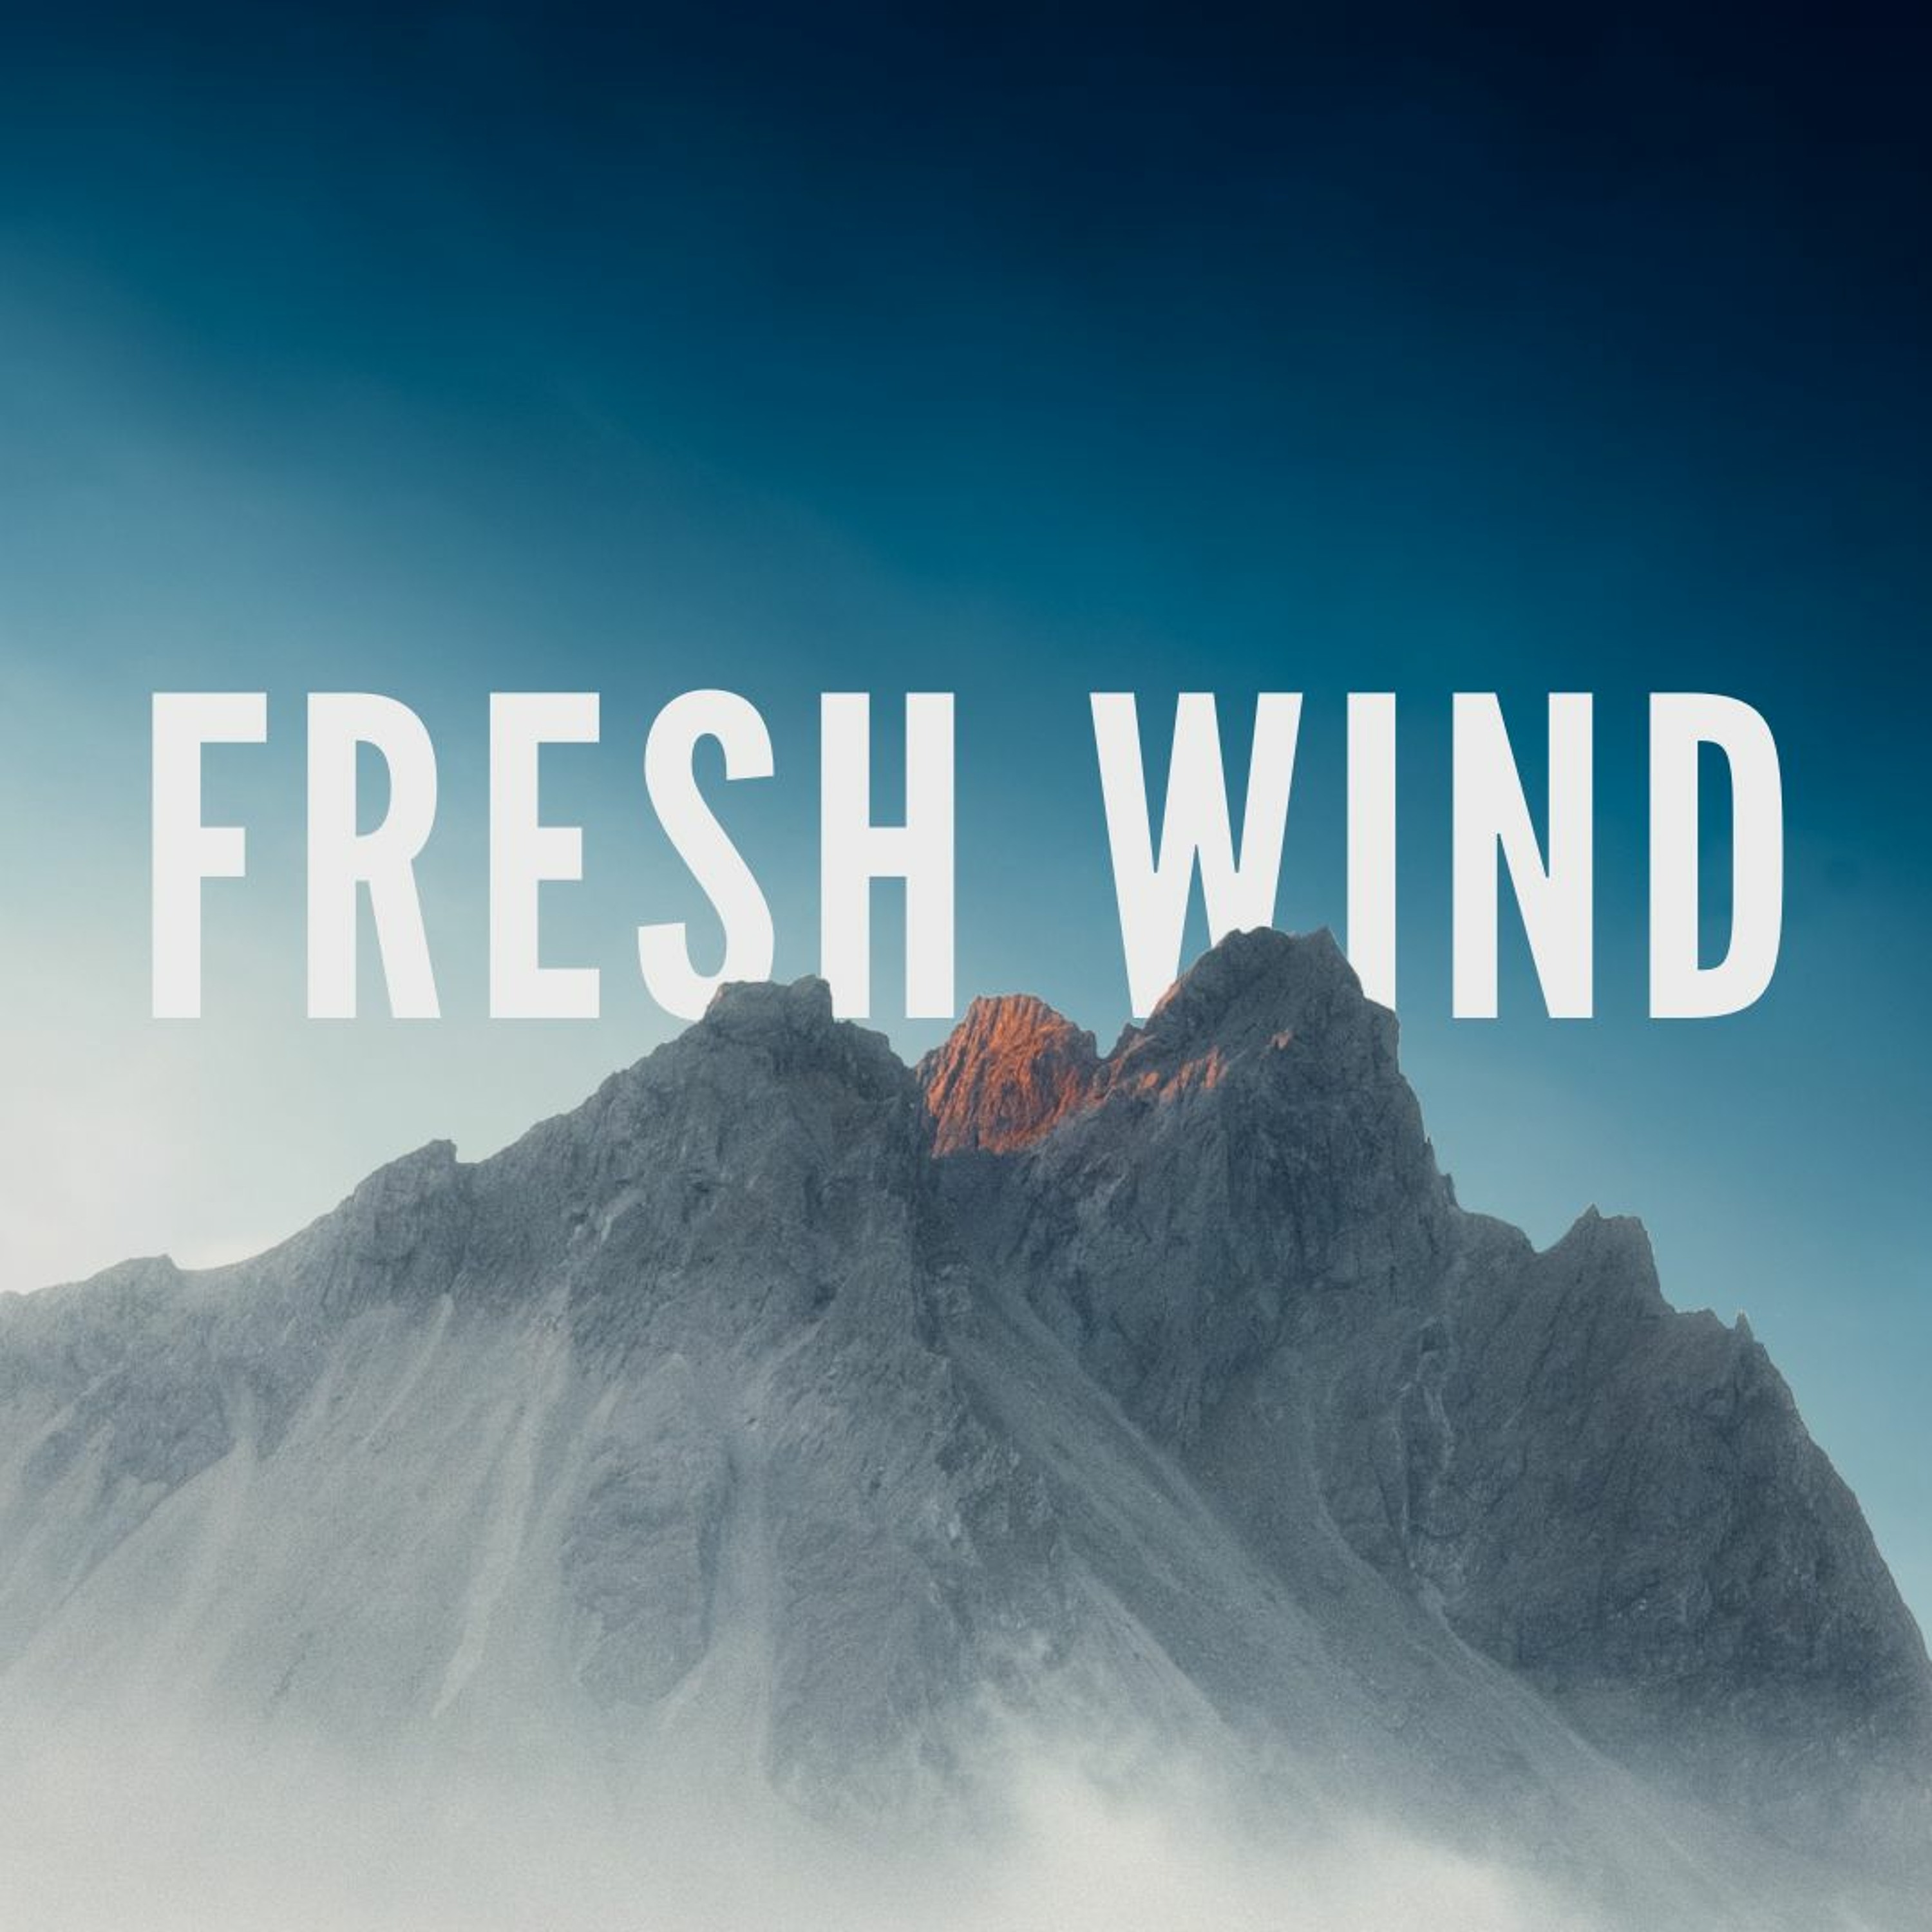 Fresh Wind - Part 3 - Gifts Of The Spirit (Daniel Quinby)